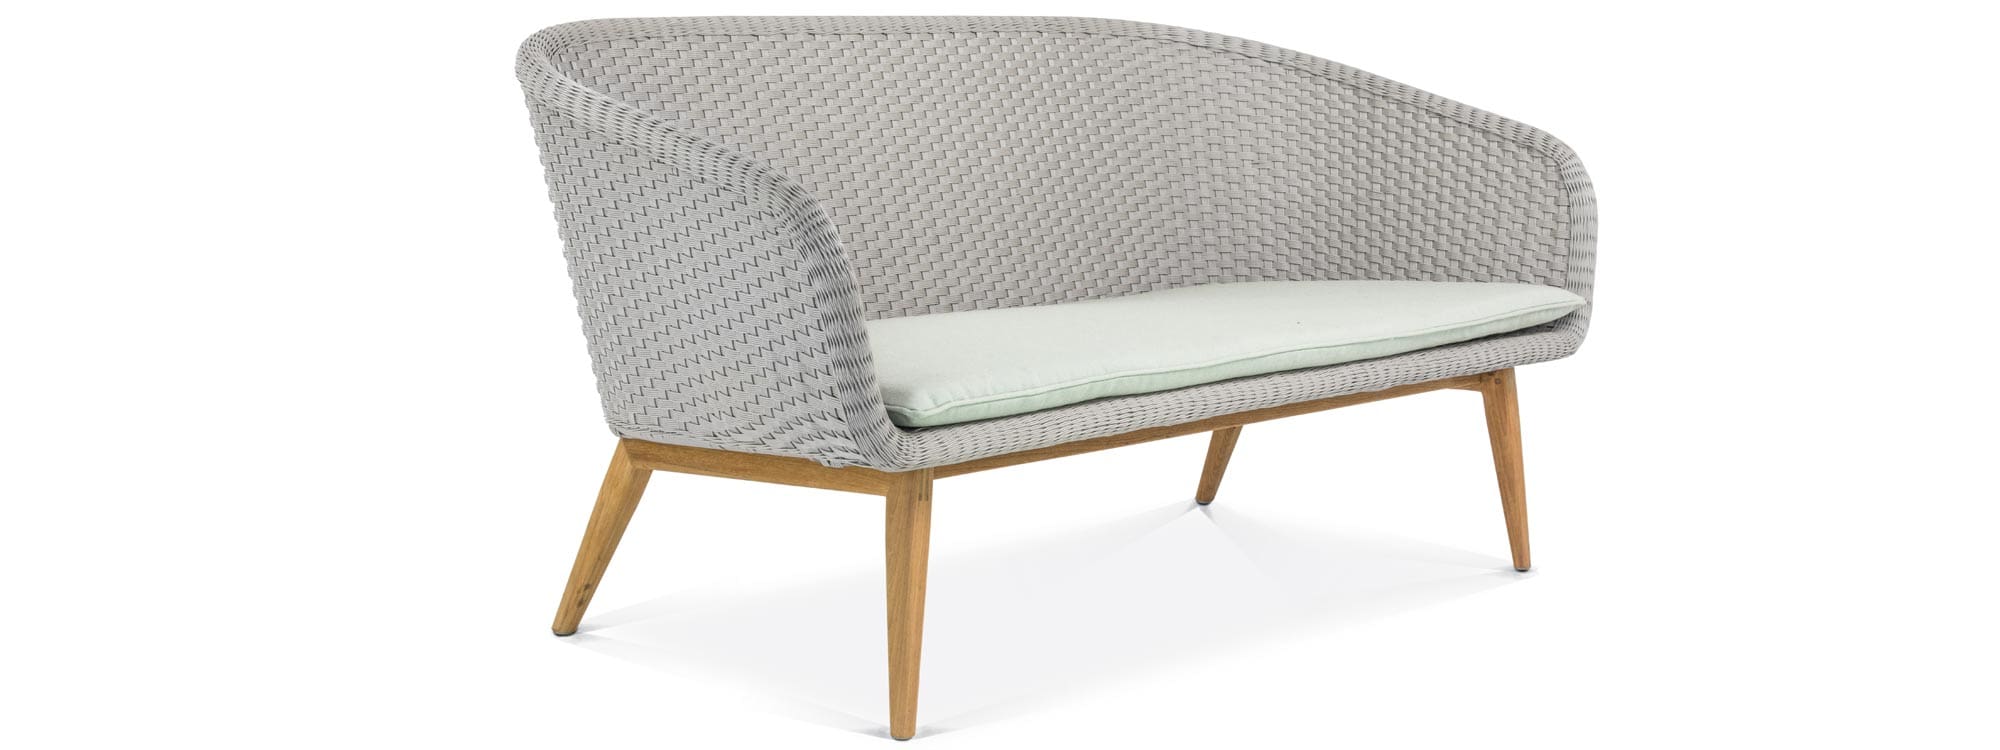 Image of Shell modern2 seat garden sofa with taupe Bayline hand-woven seat and back, teak legs and slim Sunbrella seat cushion